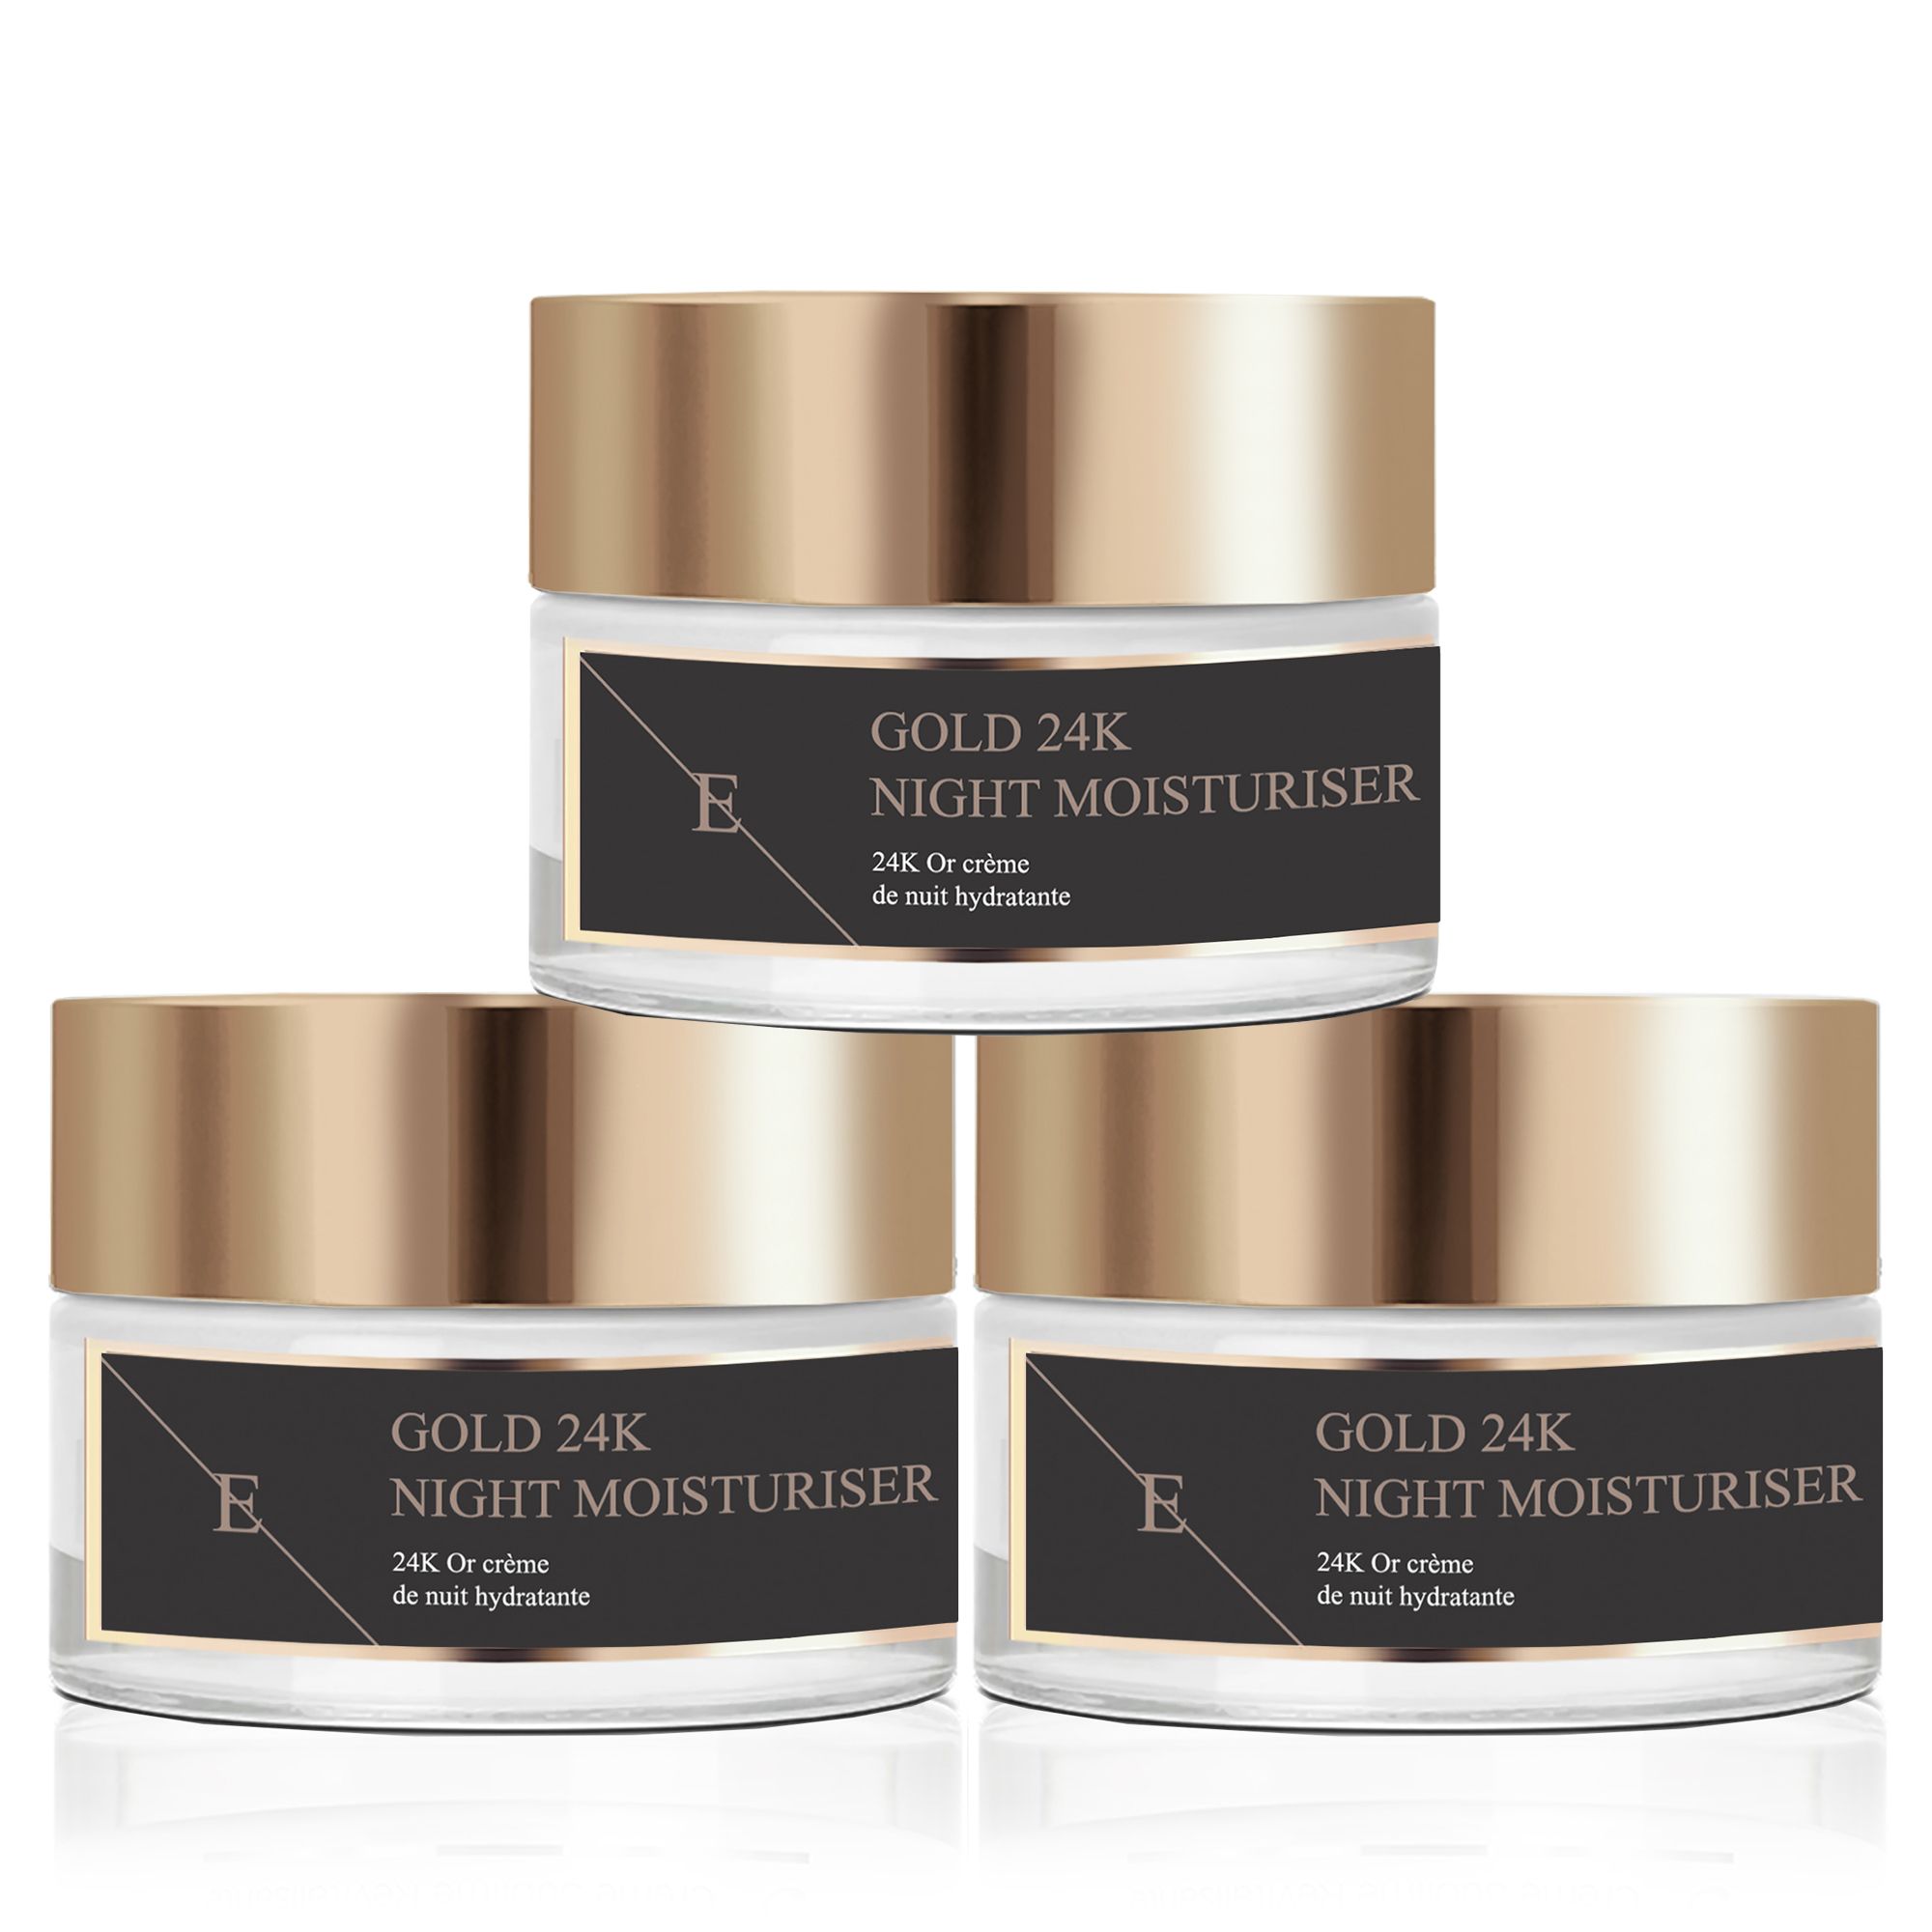 3 x Eclat Skin Londonâ€™s Anti-Wrinkle Cream aims to boost skin renewal and smoothen the look of fine lines and wrinkles. The cream has a luxurious nourishing creamy and lightweight texture that absorbs easily. Activated with 24K Gold and Vitamin A.

Key Ingredients:

24 K - CARAT GOLD
Gold has been used in skincare from Egyptian times, it is said that Cleopatra used to sleep with a gold mask. Gold is a true anti-ageing ingredient as it is anti-oxidant that protects, balances and calms the skin as well as aims to brighten and firm.

VITAMIN-A / RETINYL PALMITATE
Retinyl palmitate is the the ester of retinol (vitamin A) combined with palmitic acid, a saturated fatty acid. Retinyl palmitate is considered a less irritating form of retinol, and a gentler ingredient on sensitive skin. It has similar effect to Retinol that is known to be one of the best anti-ageing skincare ingredients in the world. It has an effect of repeatedly shedding the upper dermal layer forces the skin to produce new cells, this aims to boost skin renewal and smoothens the look of wrinkles.

MACADAMIA OIL & ABYSSINIAN OIL
Macadamia and Abyssinian oils are both lightweight quickly absorbing oils with great fatty acids ratio that moisturises the skin and boosts skin softness.

USAGE: Apply pea-sized amount of the cream on cleansed face, neckline and neck in the morning. Continue with Eclat Skin Londonâ€™s Gold 24K Anti-Wrinkle Eye Cream. For best results use with Eclat Skin Londonâ€™s Anti-Wrinkle Elixir Serum 24K Gold.